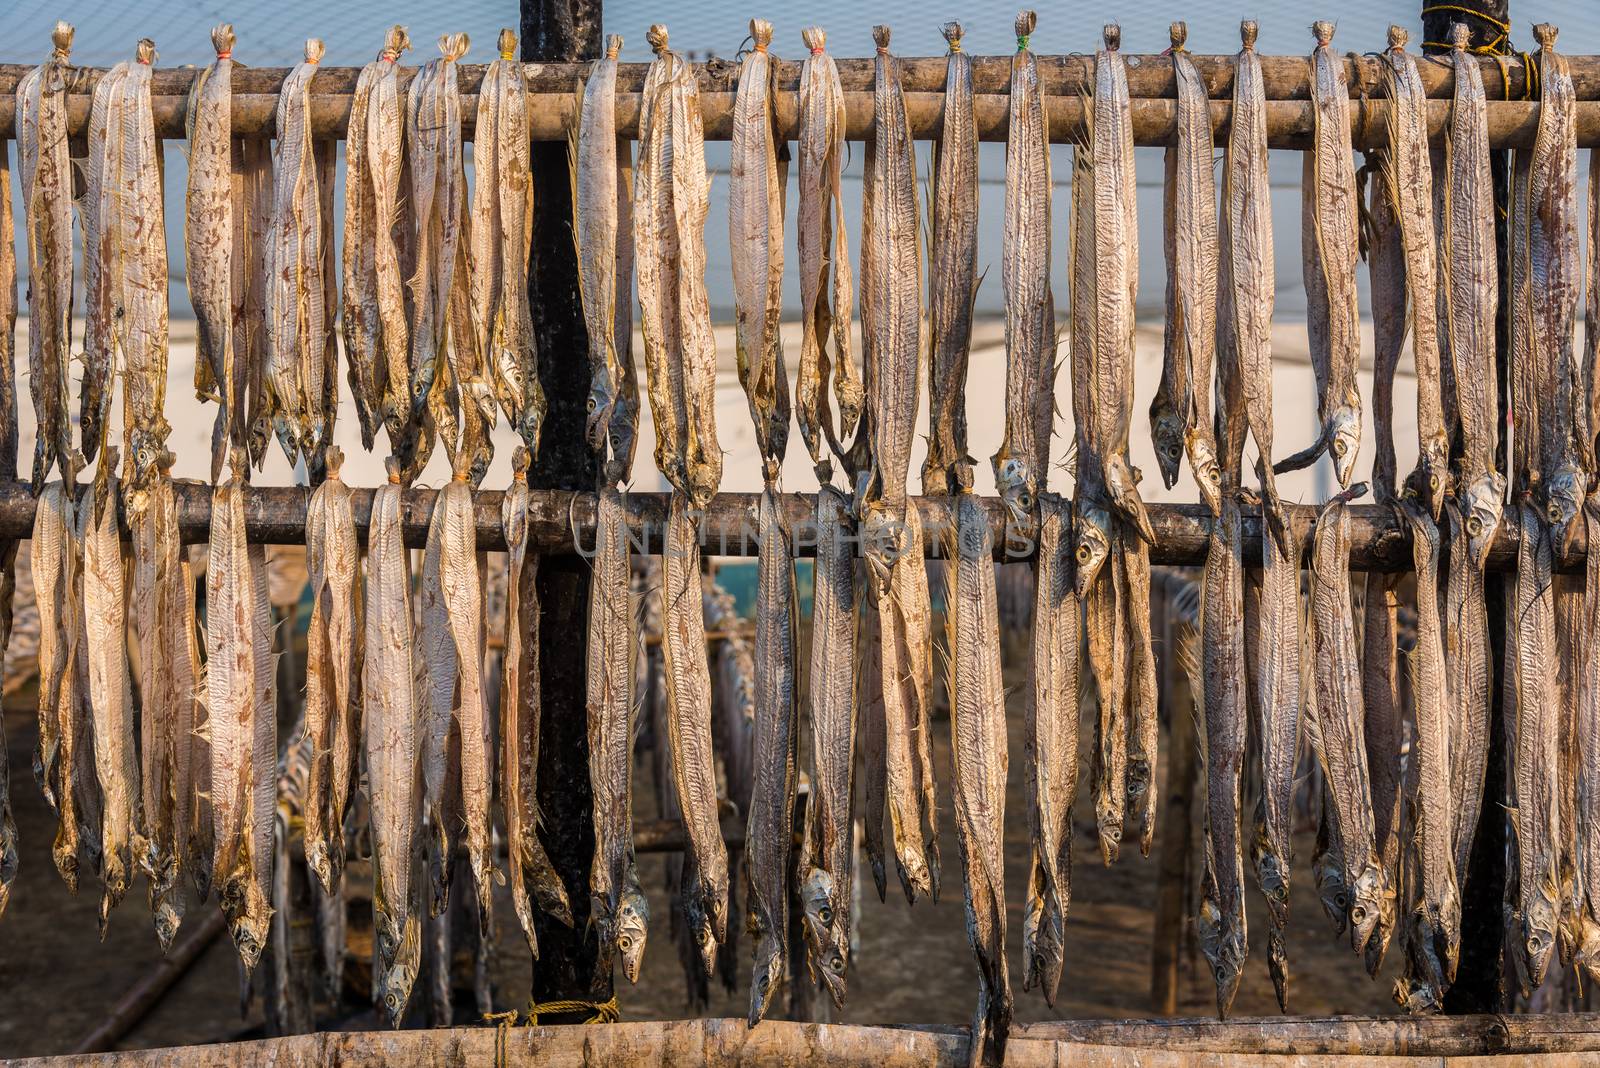 Sea fish suspended from bamboo poles being dried at a fishing industry in Digha, West Bengal, India